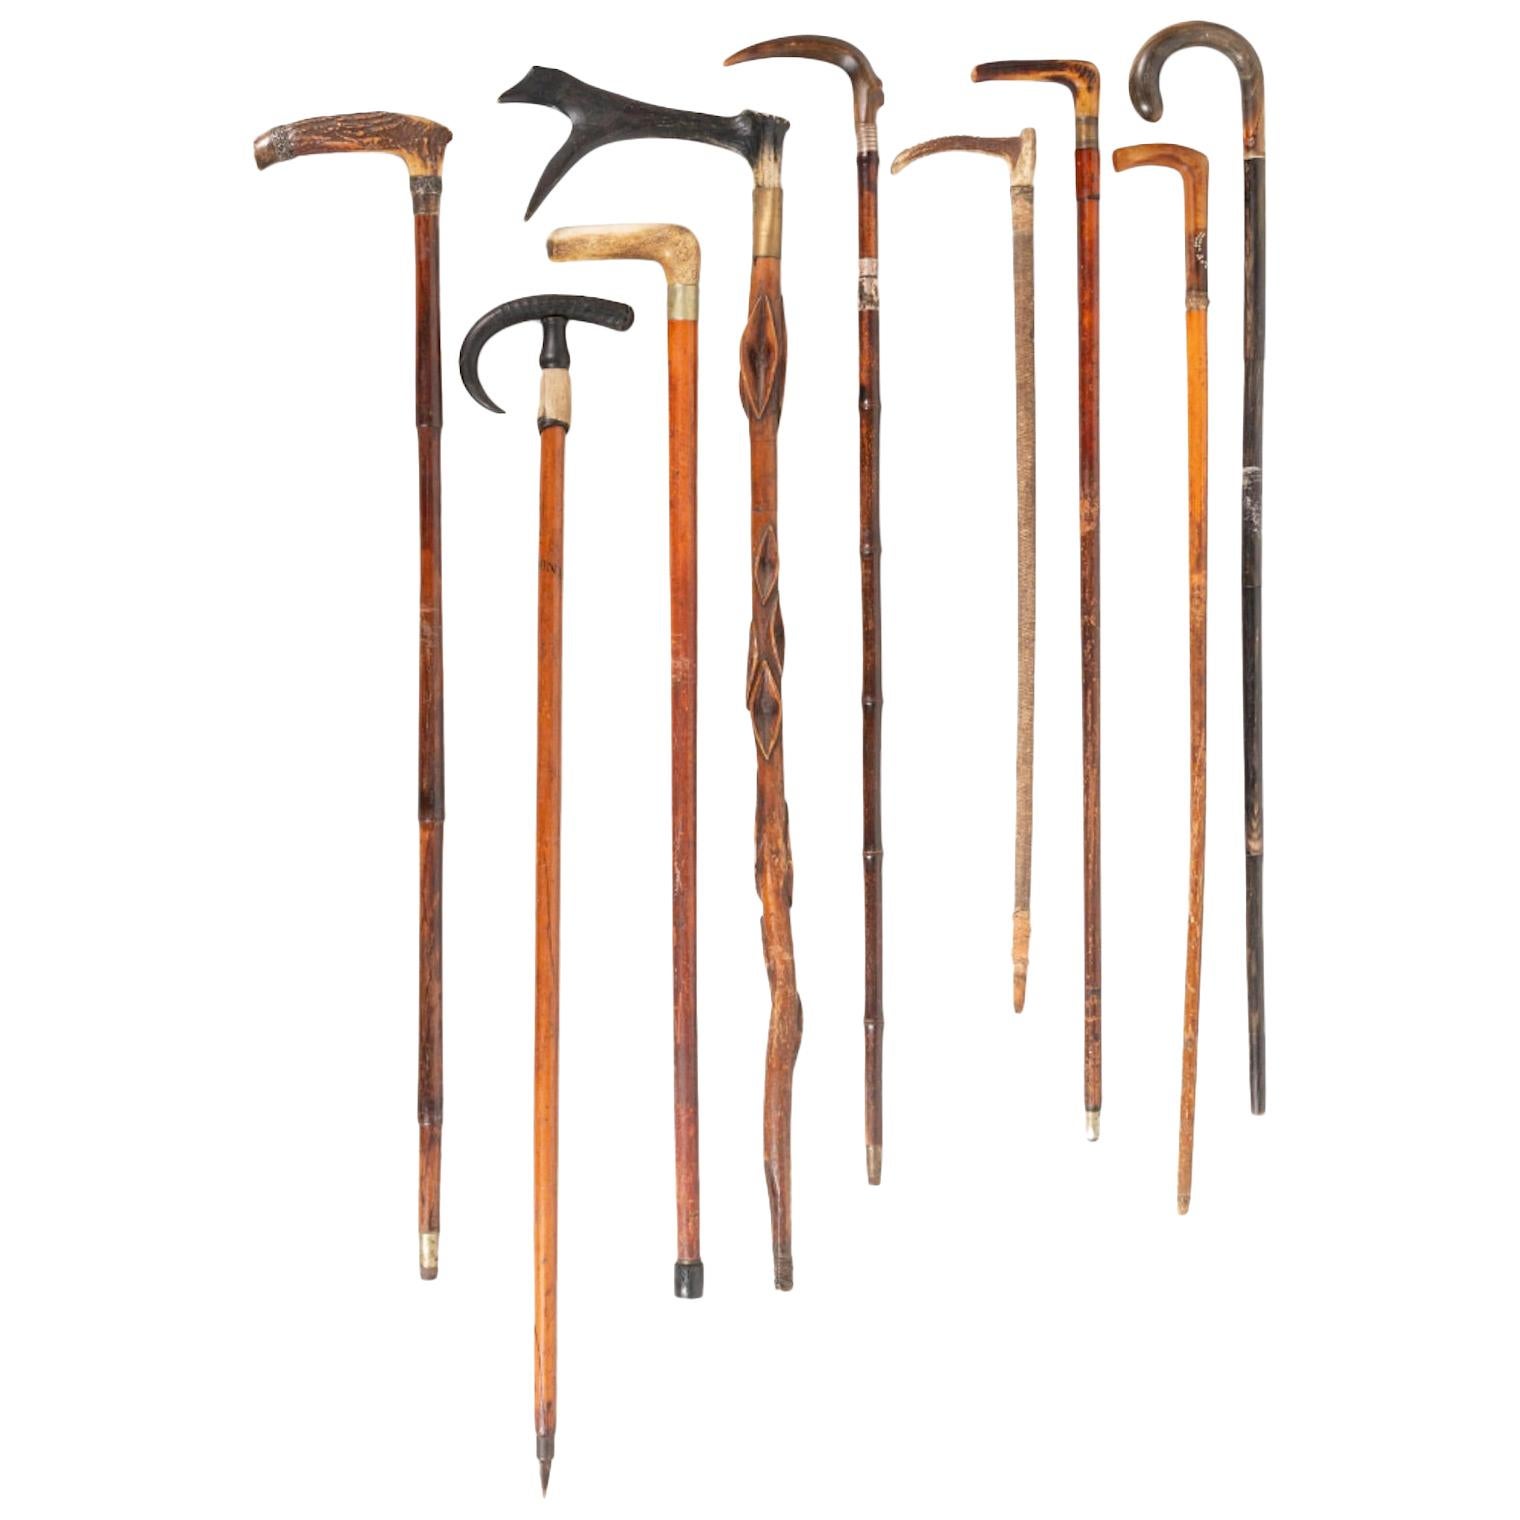 Nine Antler-Mounted Canes and Walking Sticks, Some with Concealed Daggers